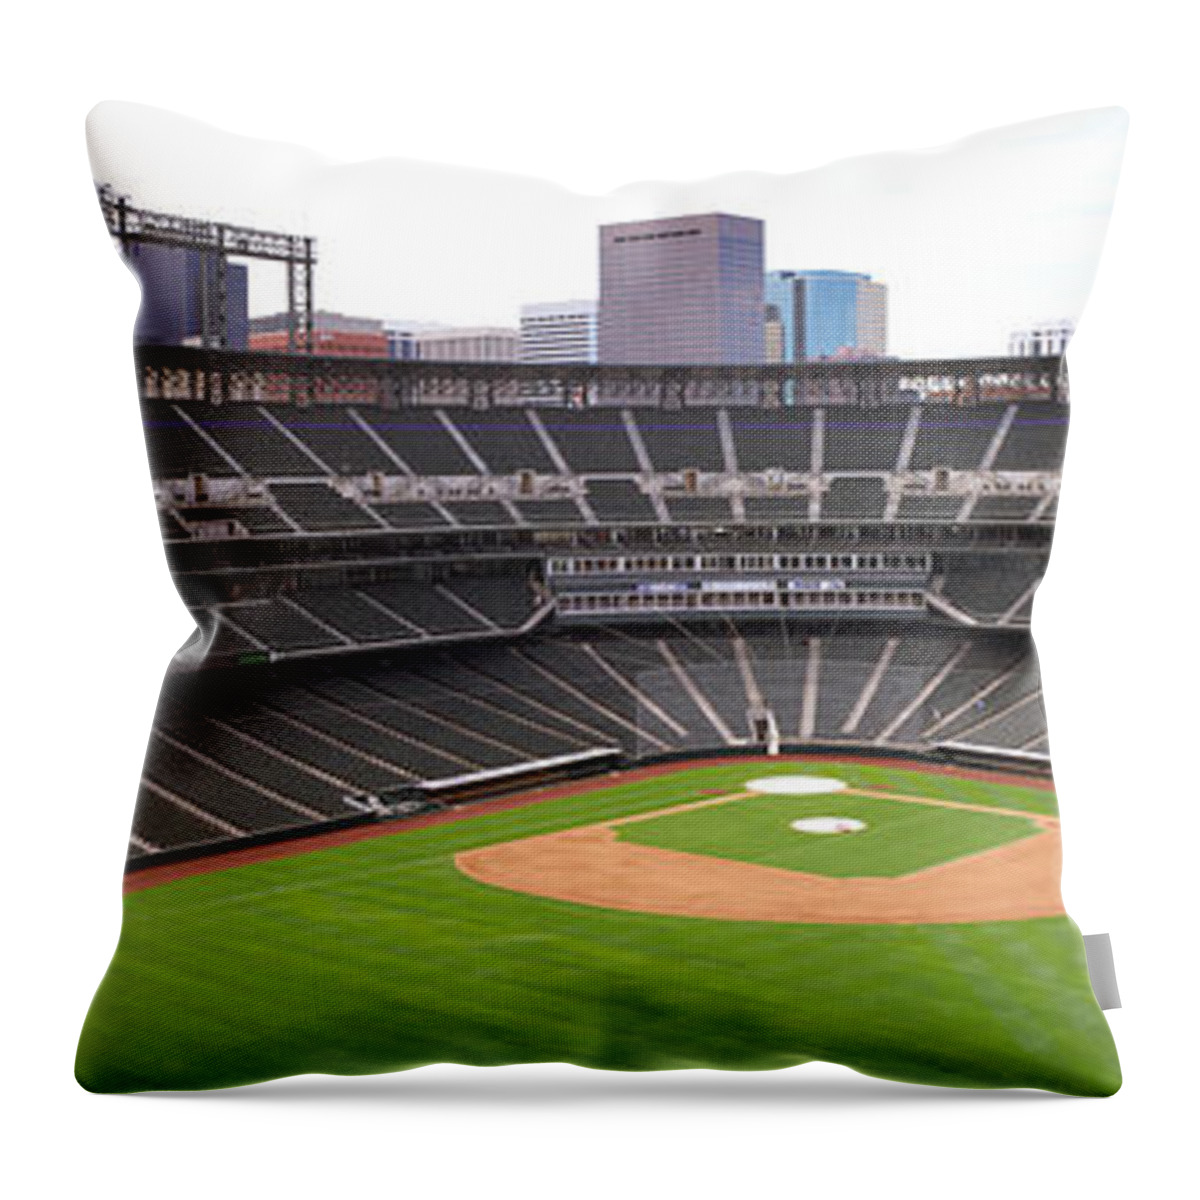 Photography Throw Pillow featuring the photograph Coors Field Denver Co by Panoramic Images